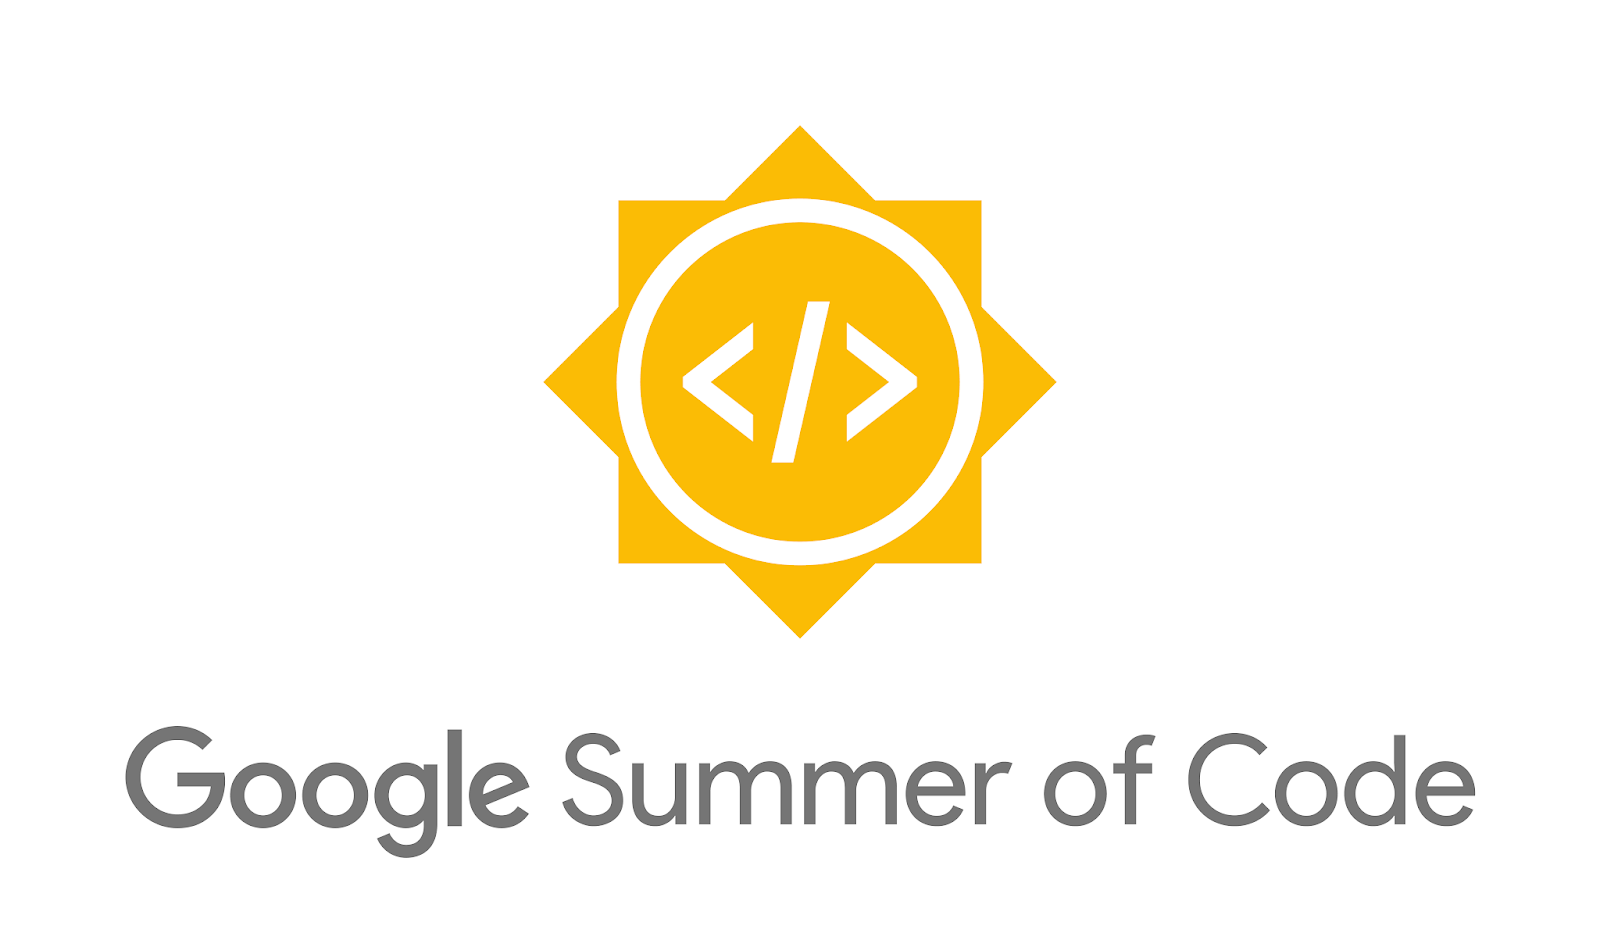 The MoveIt Project is Selected for 3 Google Summer